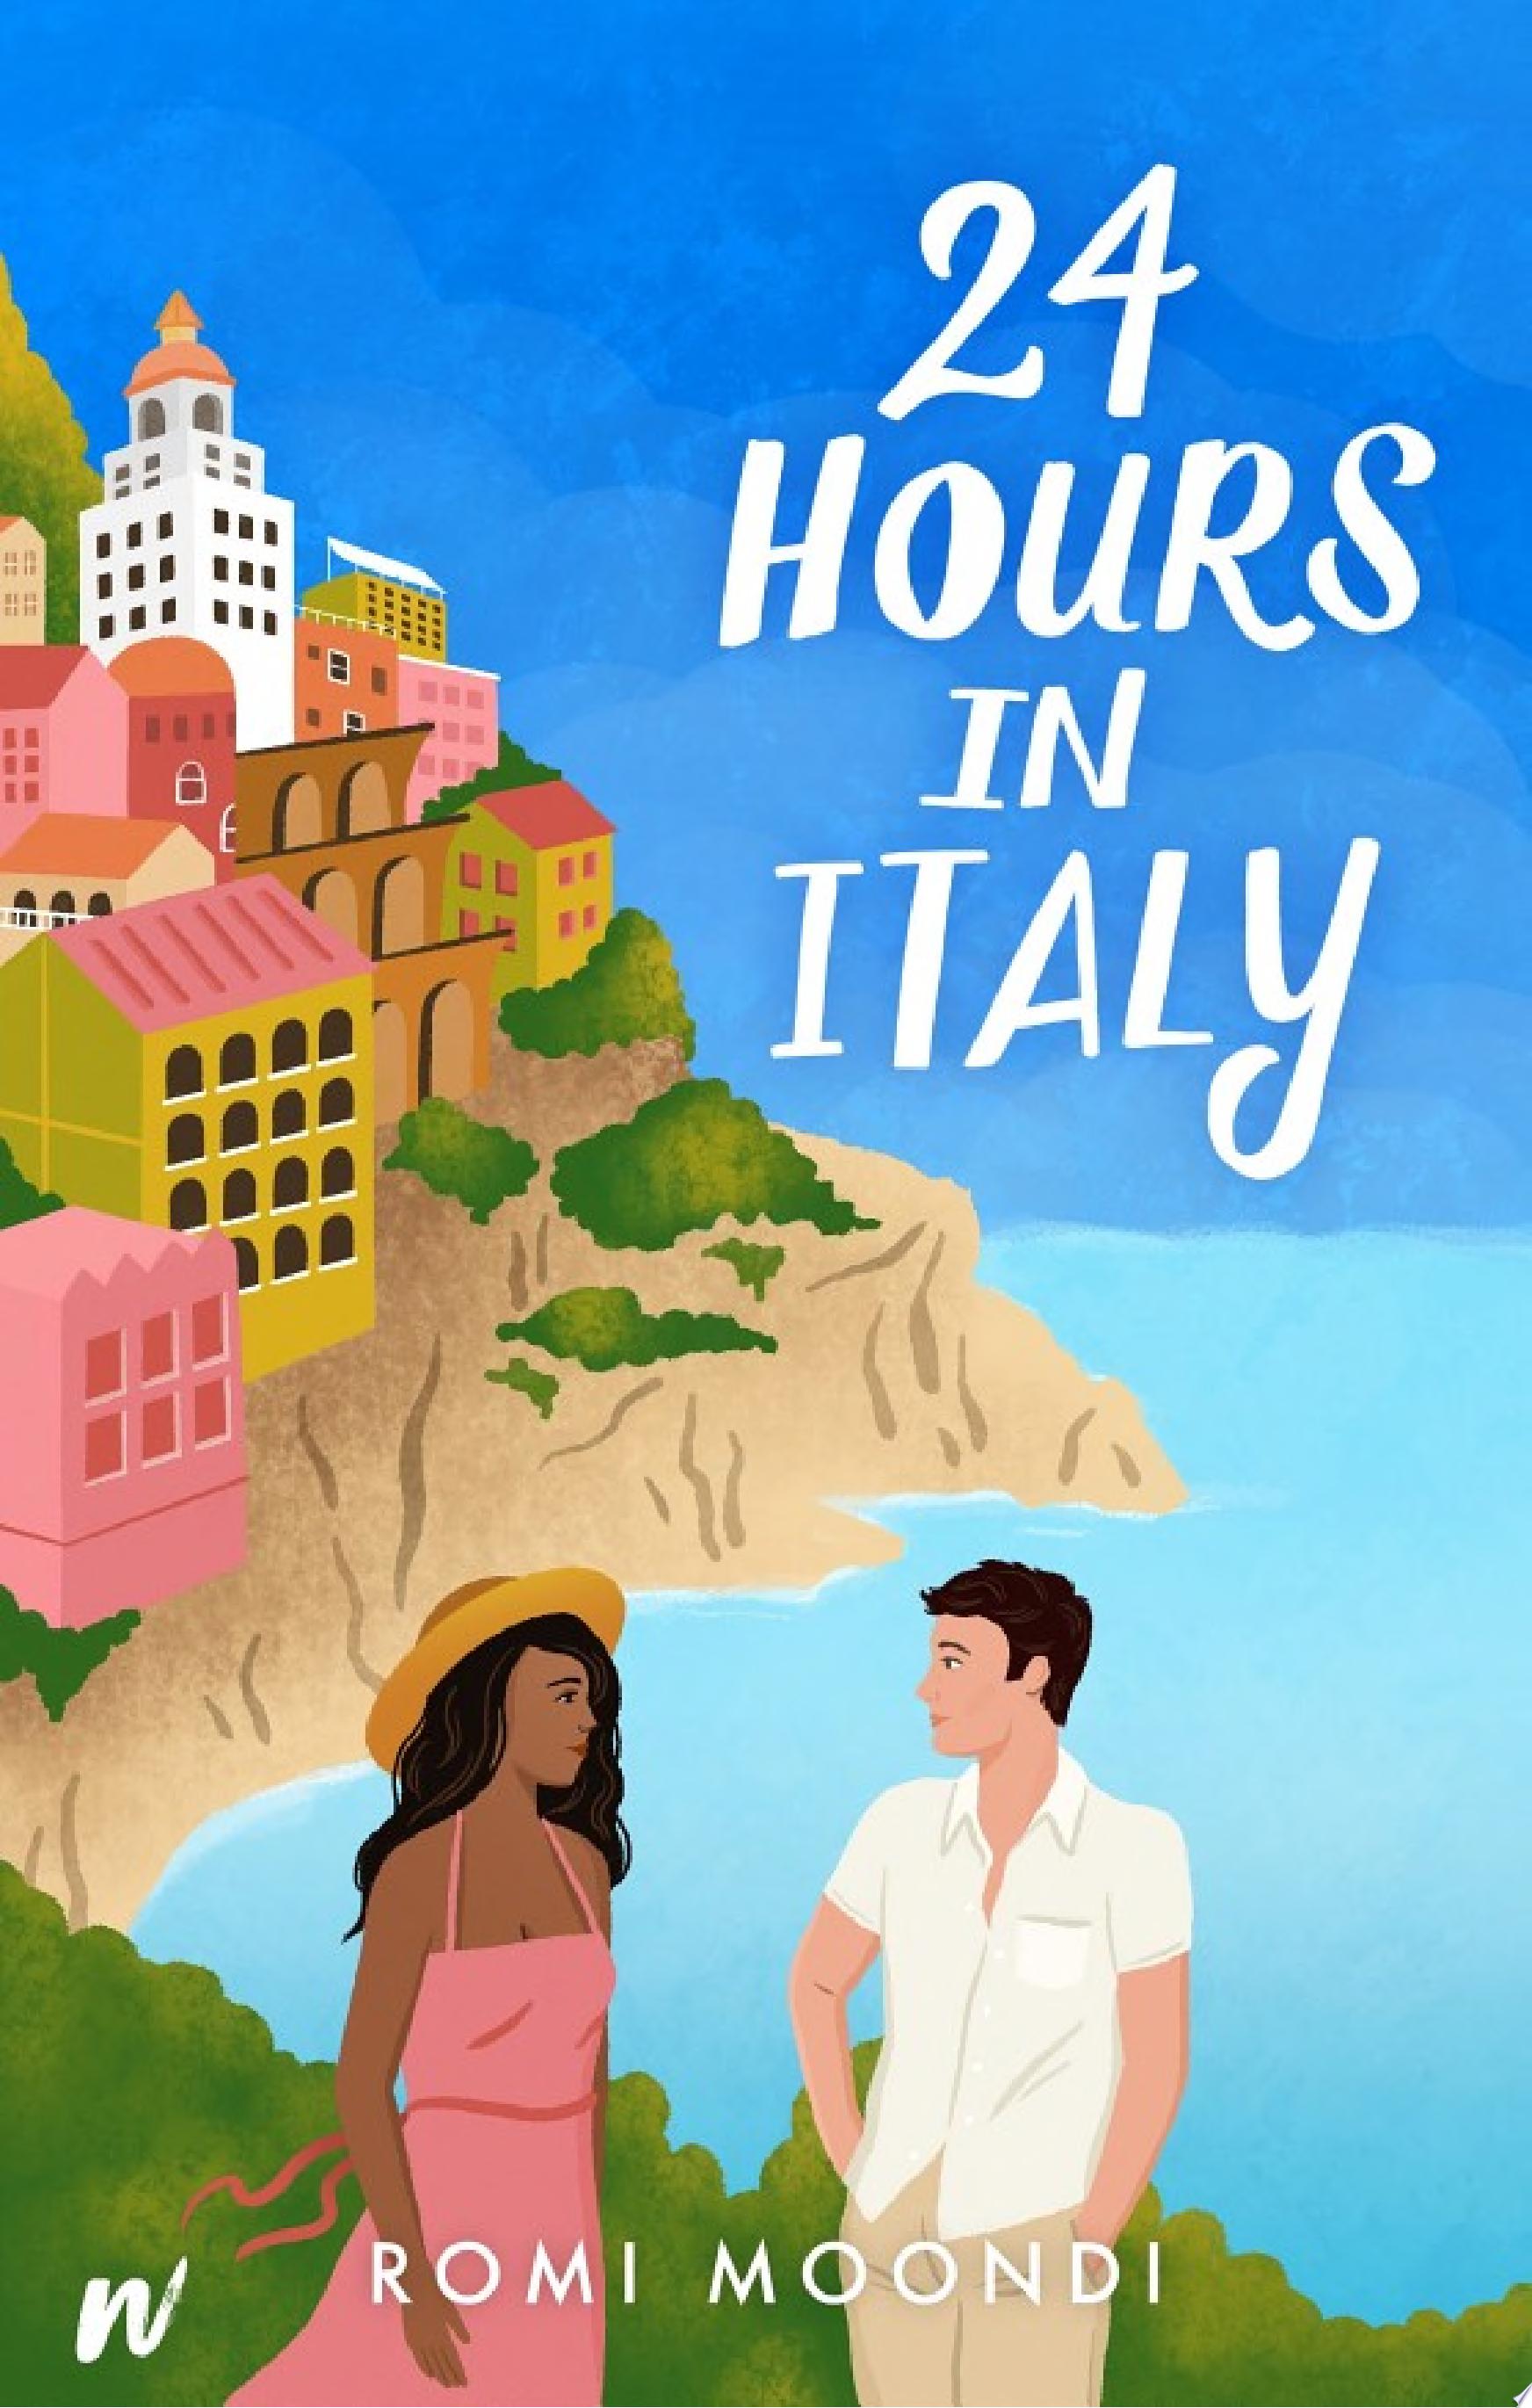 Image for "24 Hours in Italy"